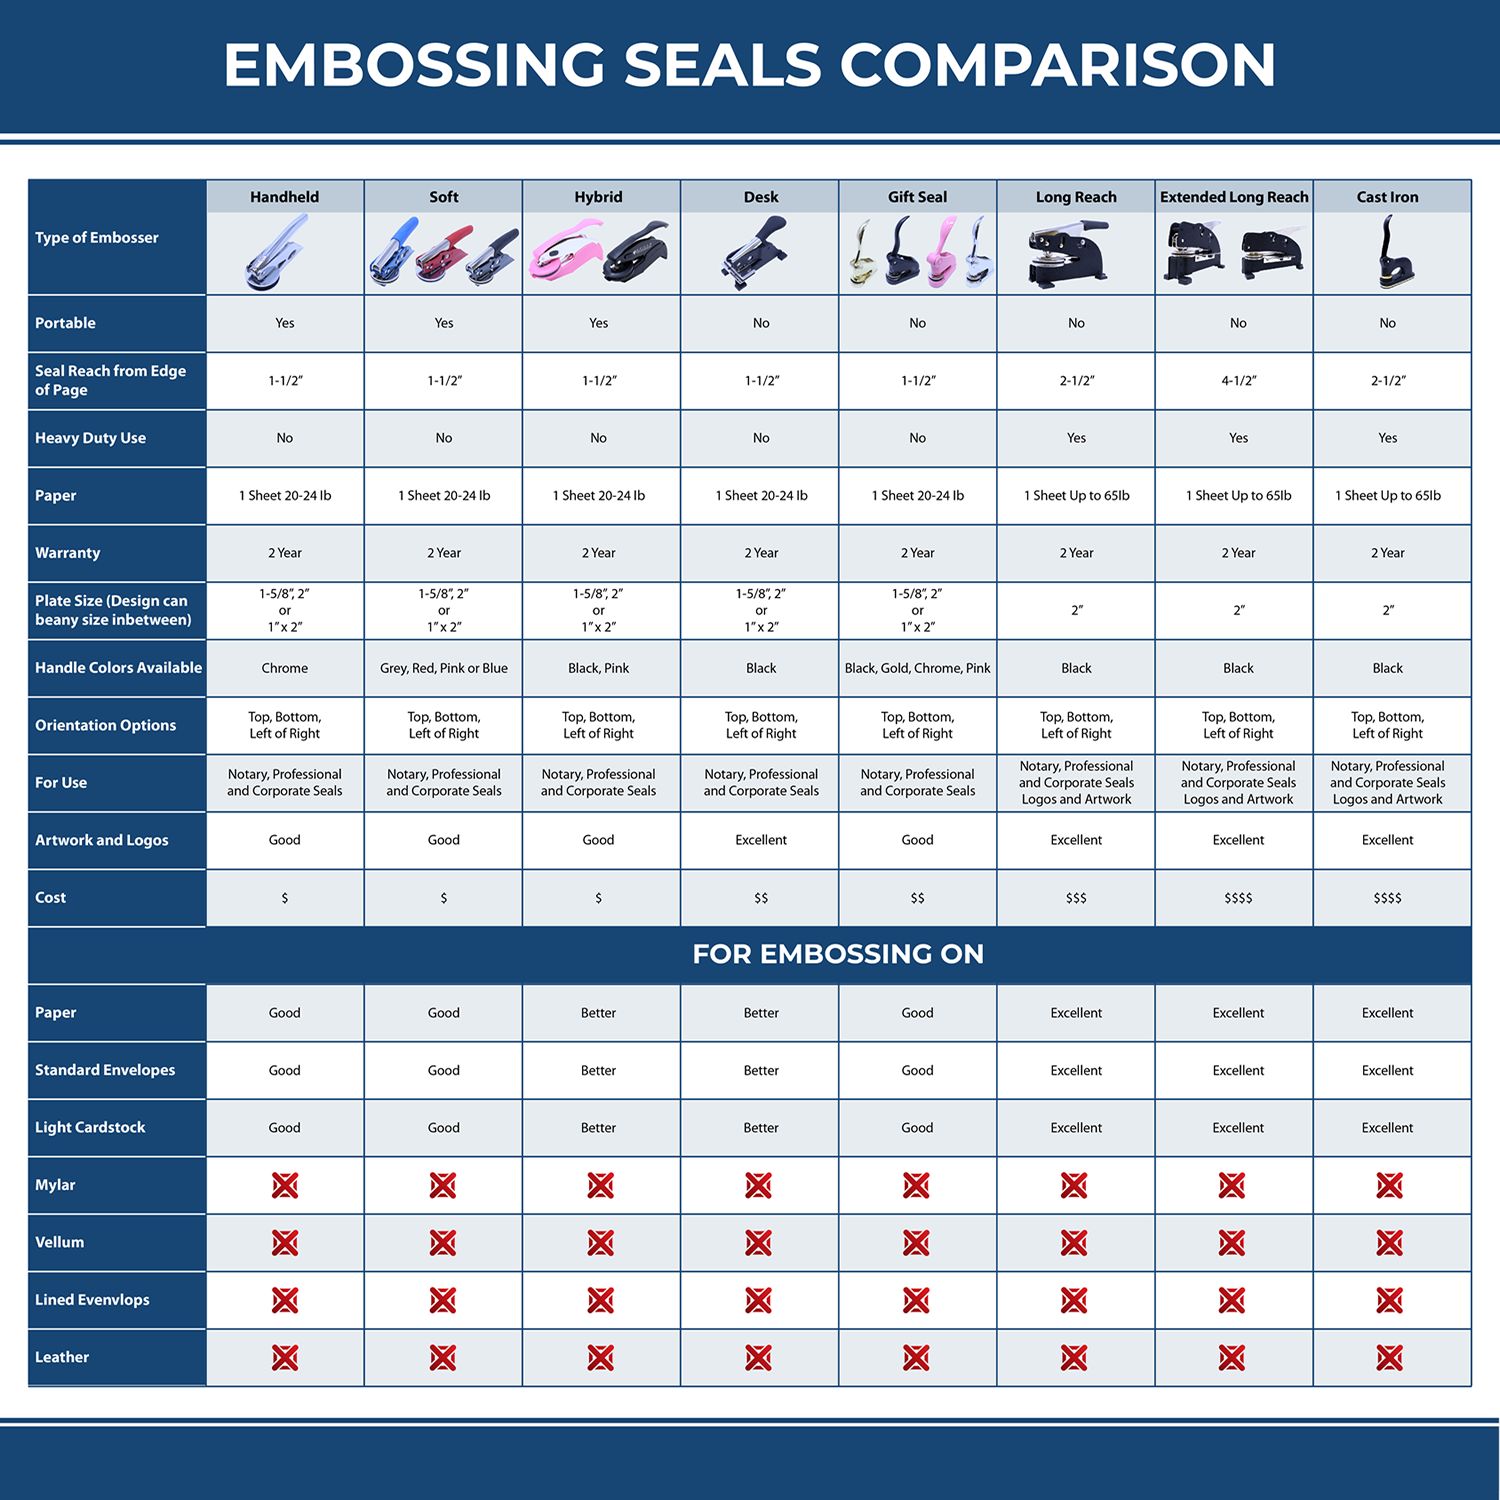 A comparison chart for the different types of mount models available for the Heavy Duty Cast Iron New Mexico Land Surveyor Seal Embosser.